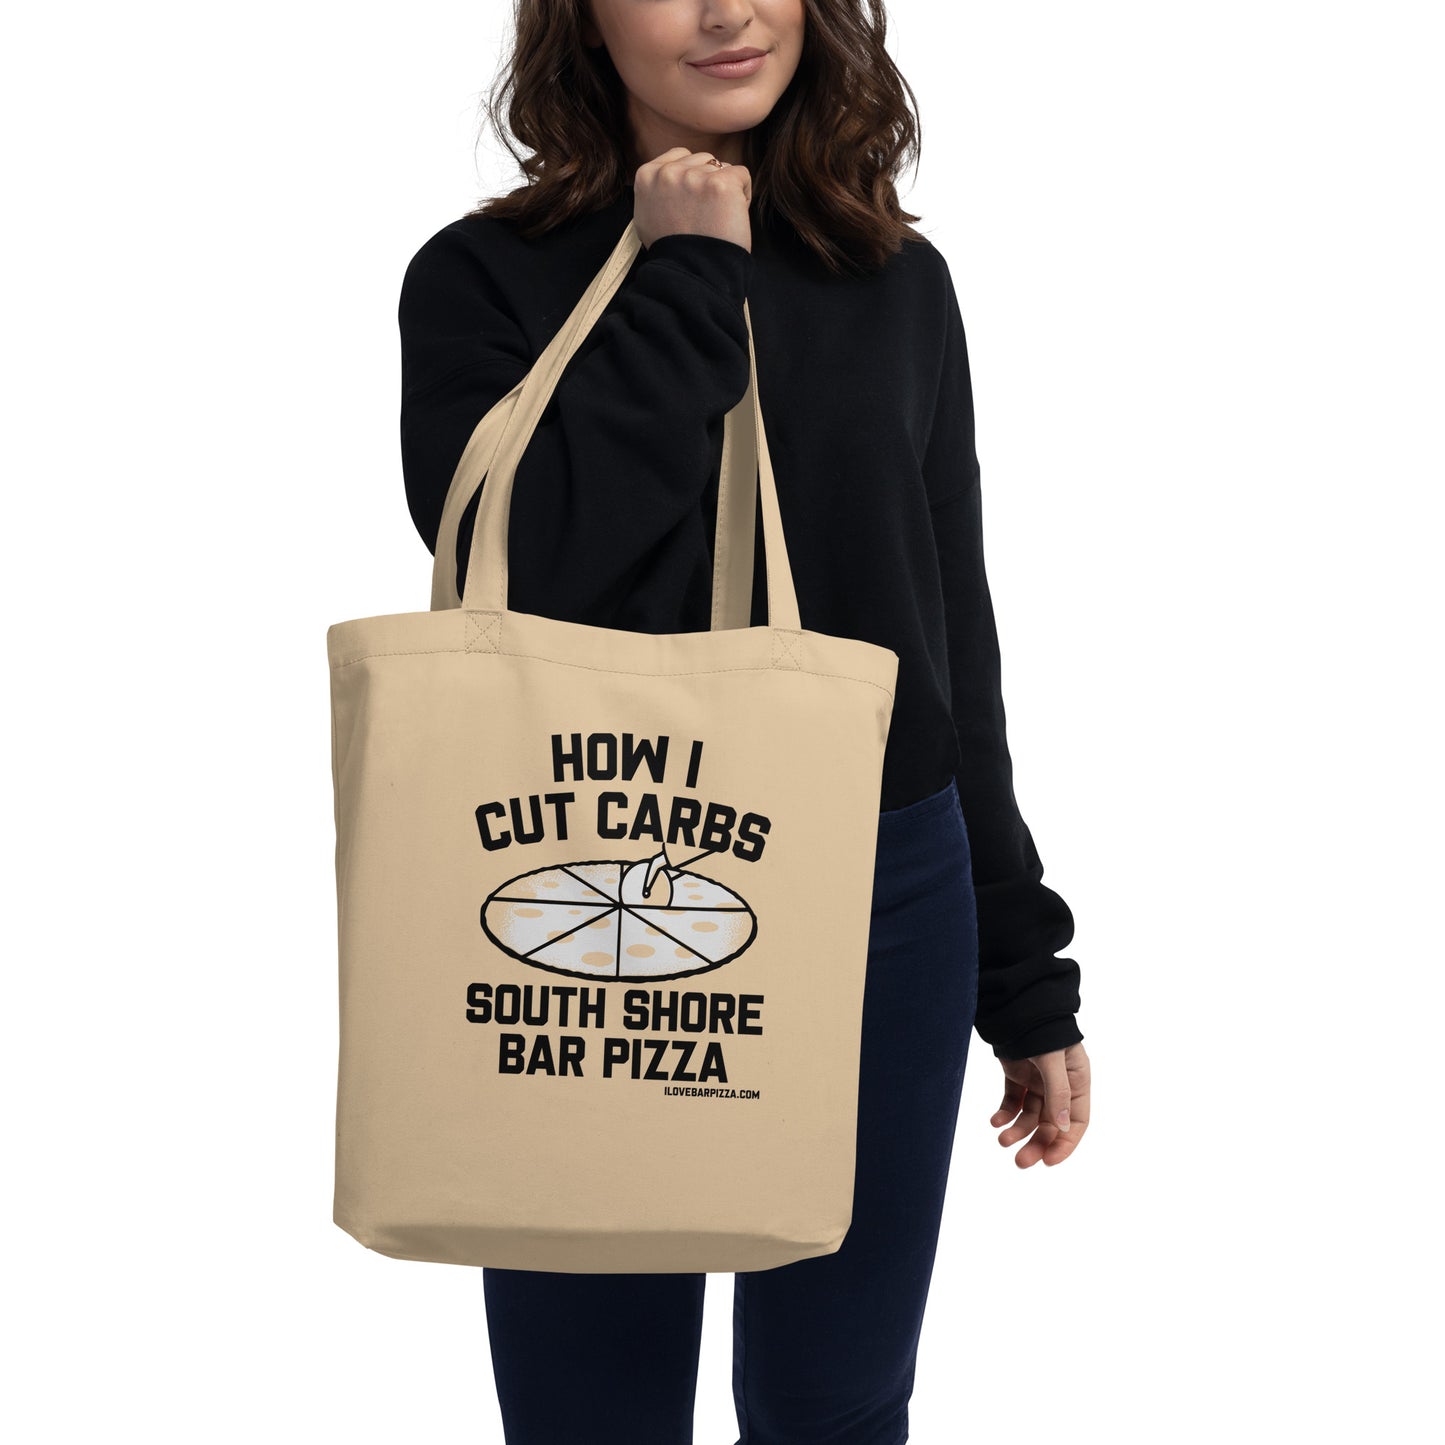 How I Cut Carbs - South Shore Bar Pizza Takeout Tote Bag